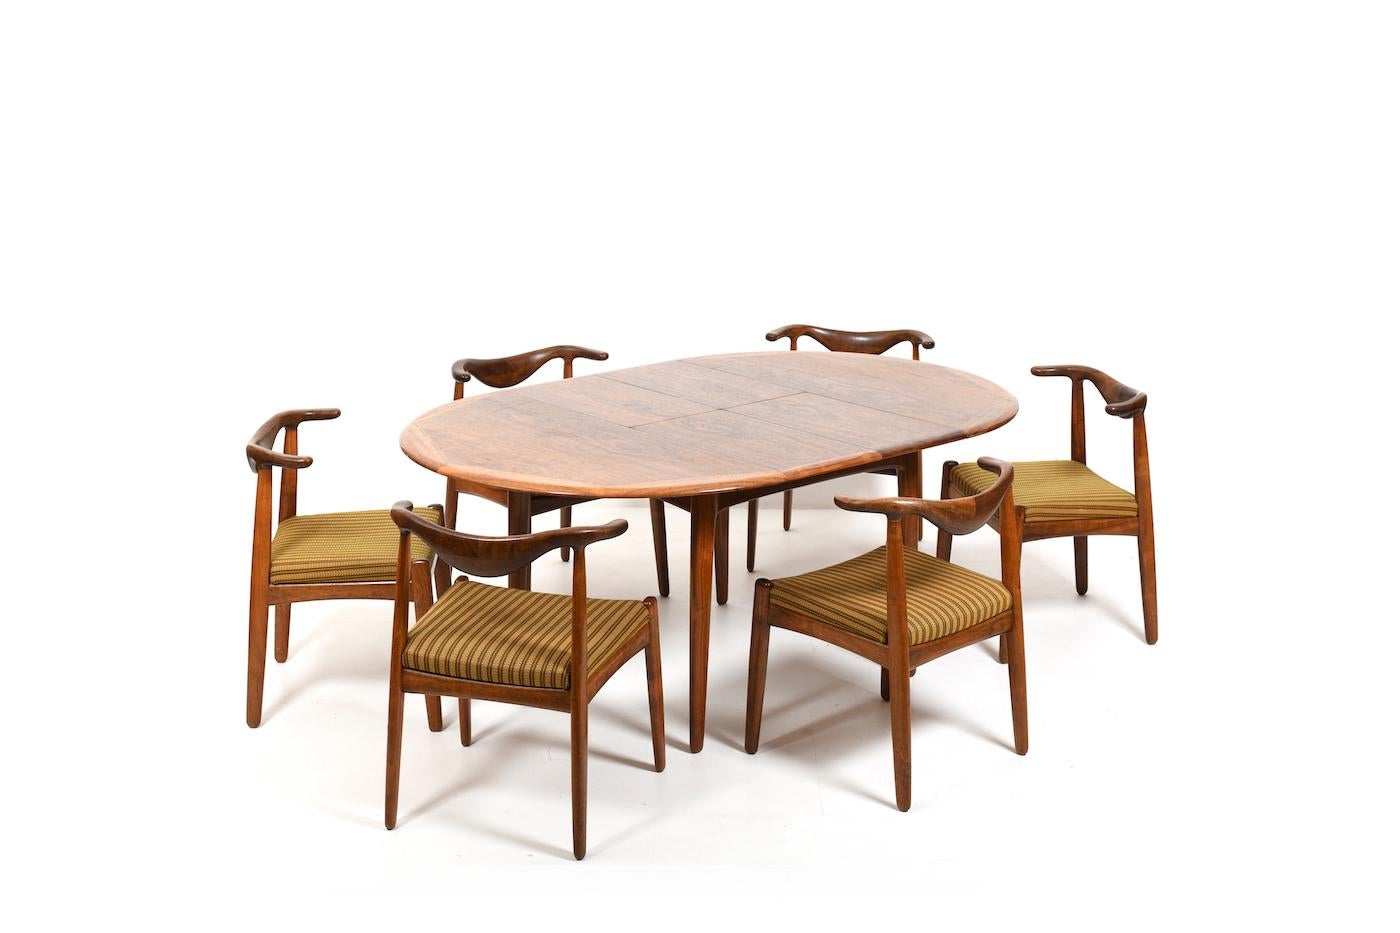 Very rare danish dining room set incl. 6 cowhorn chairs, round / oval table and the matching cabinet by Svend Aage Madsen. The whole ensemble made in finest walnut. Table with retractable leaves to enlarge the table top. Cabinet inside with drawers.